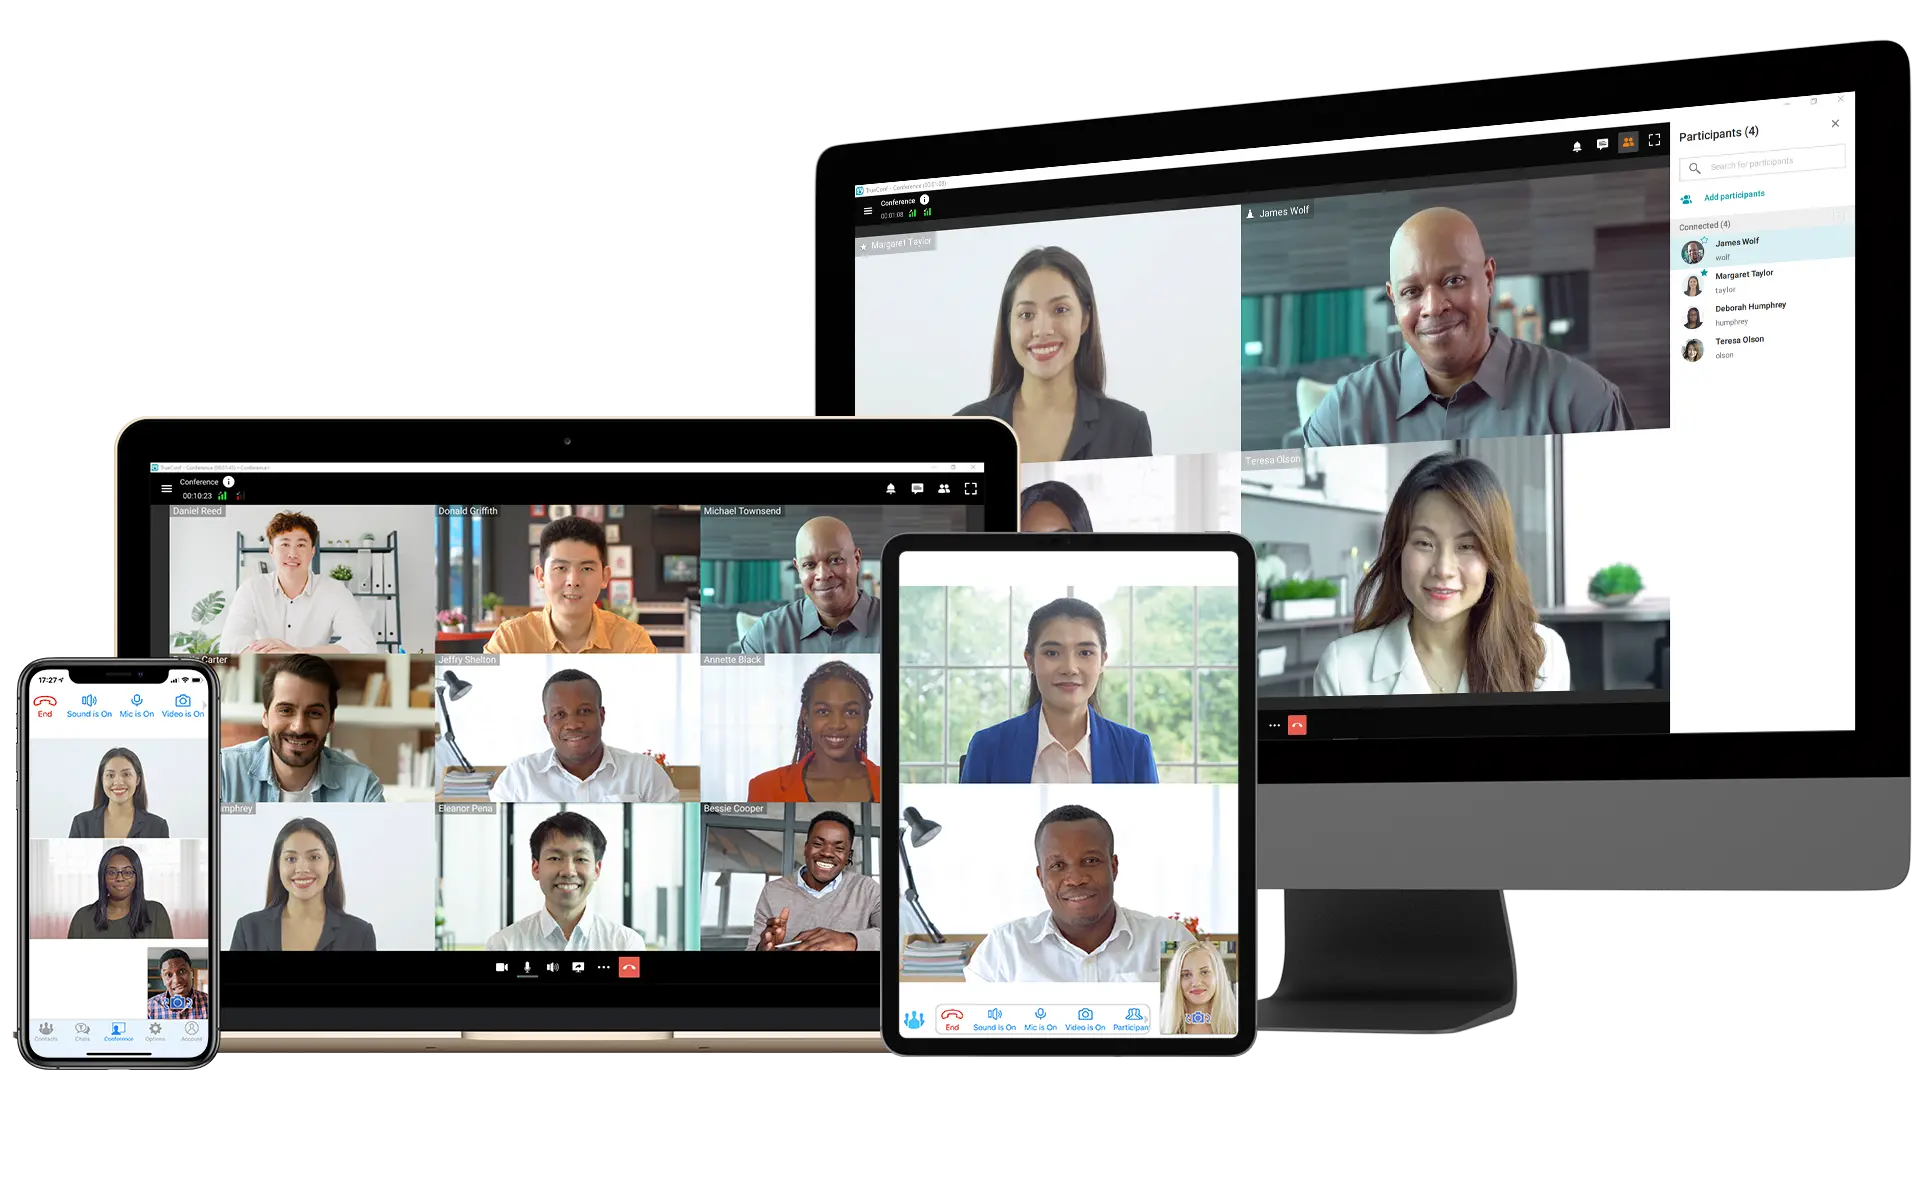 Secure Meetings to Showcase TrueConf Video Collaboration Solutions at ISE 2022 2